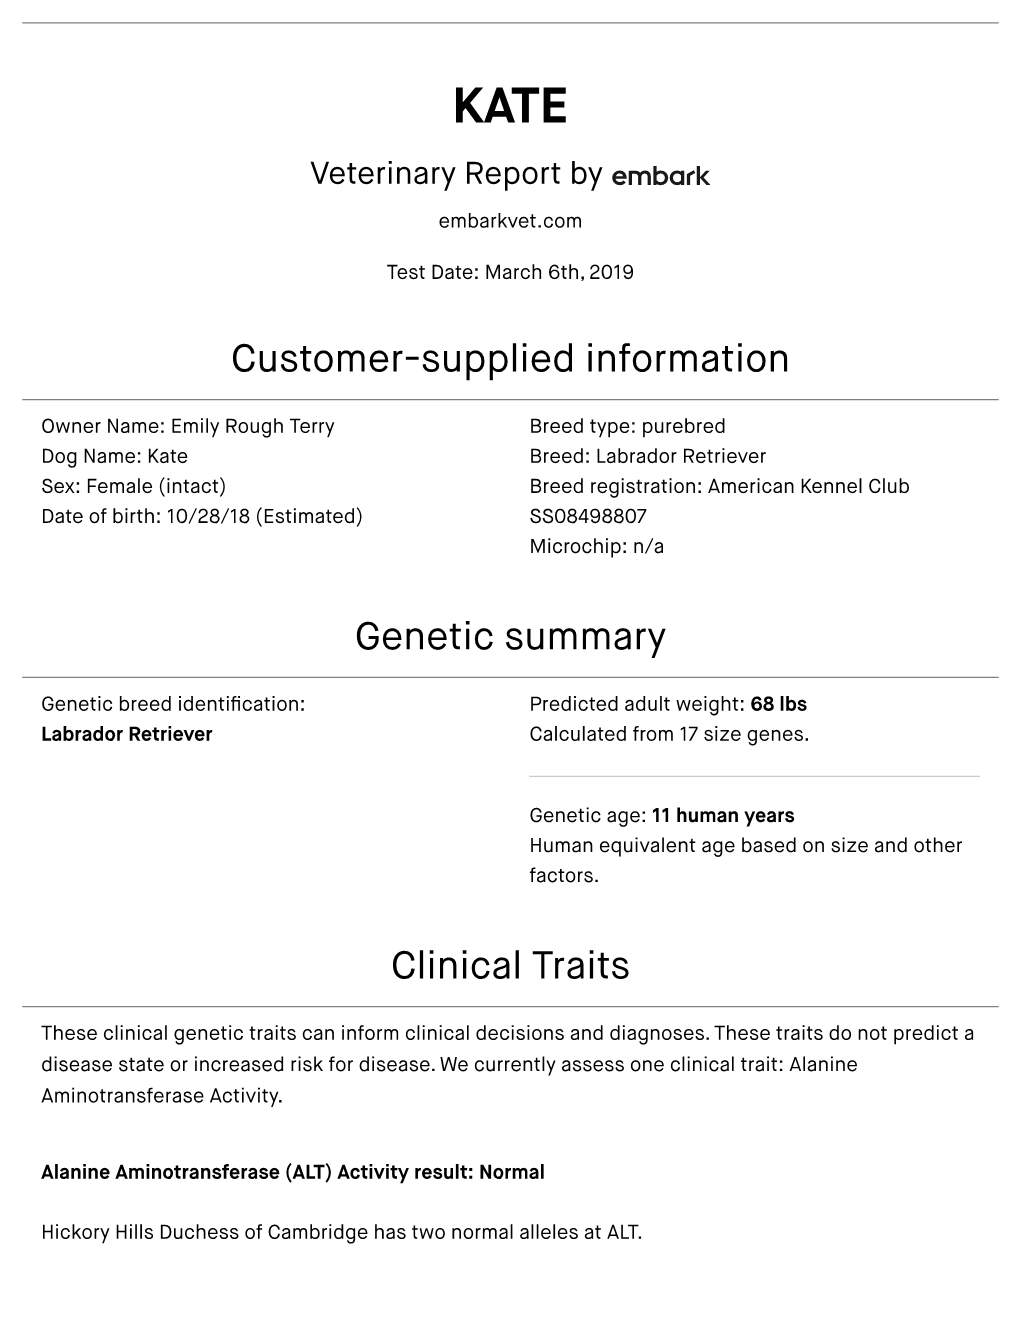 Customer-Supplied Information Genetic Summary Clinical Traits